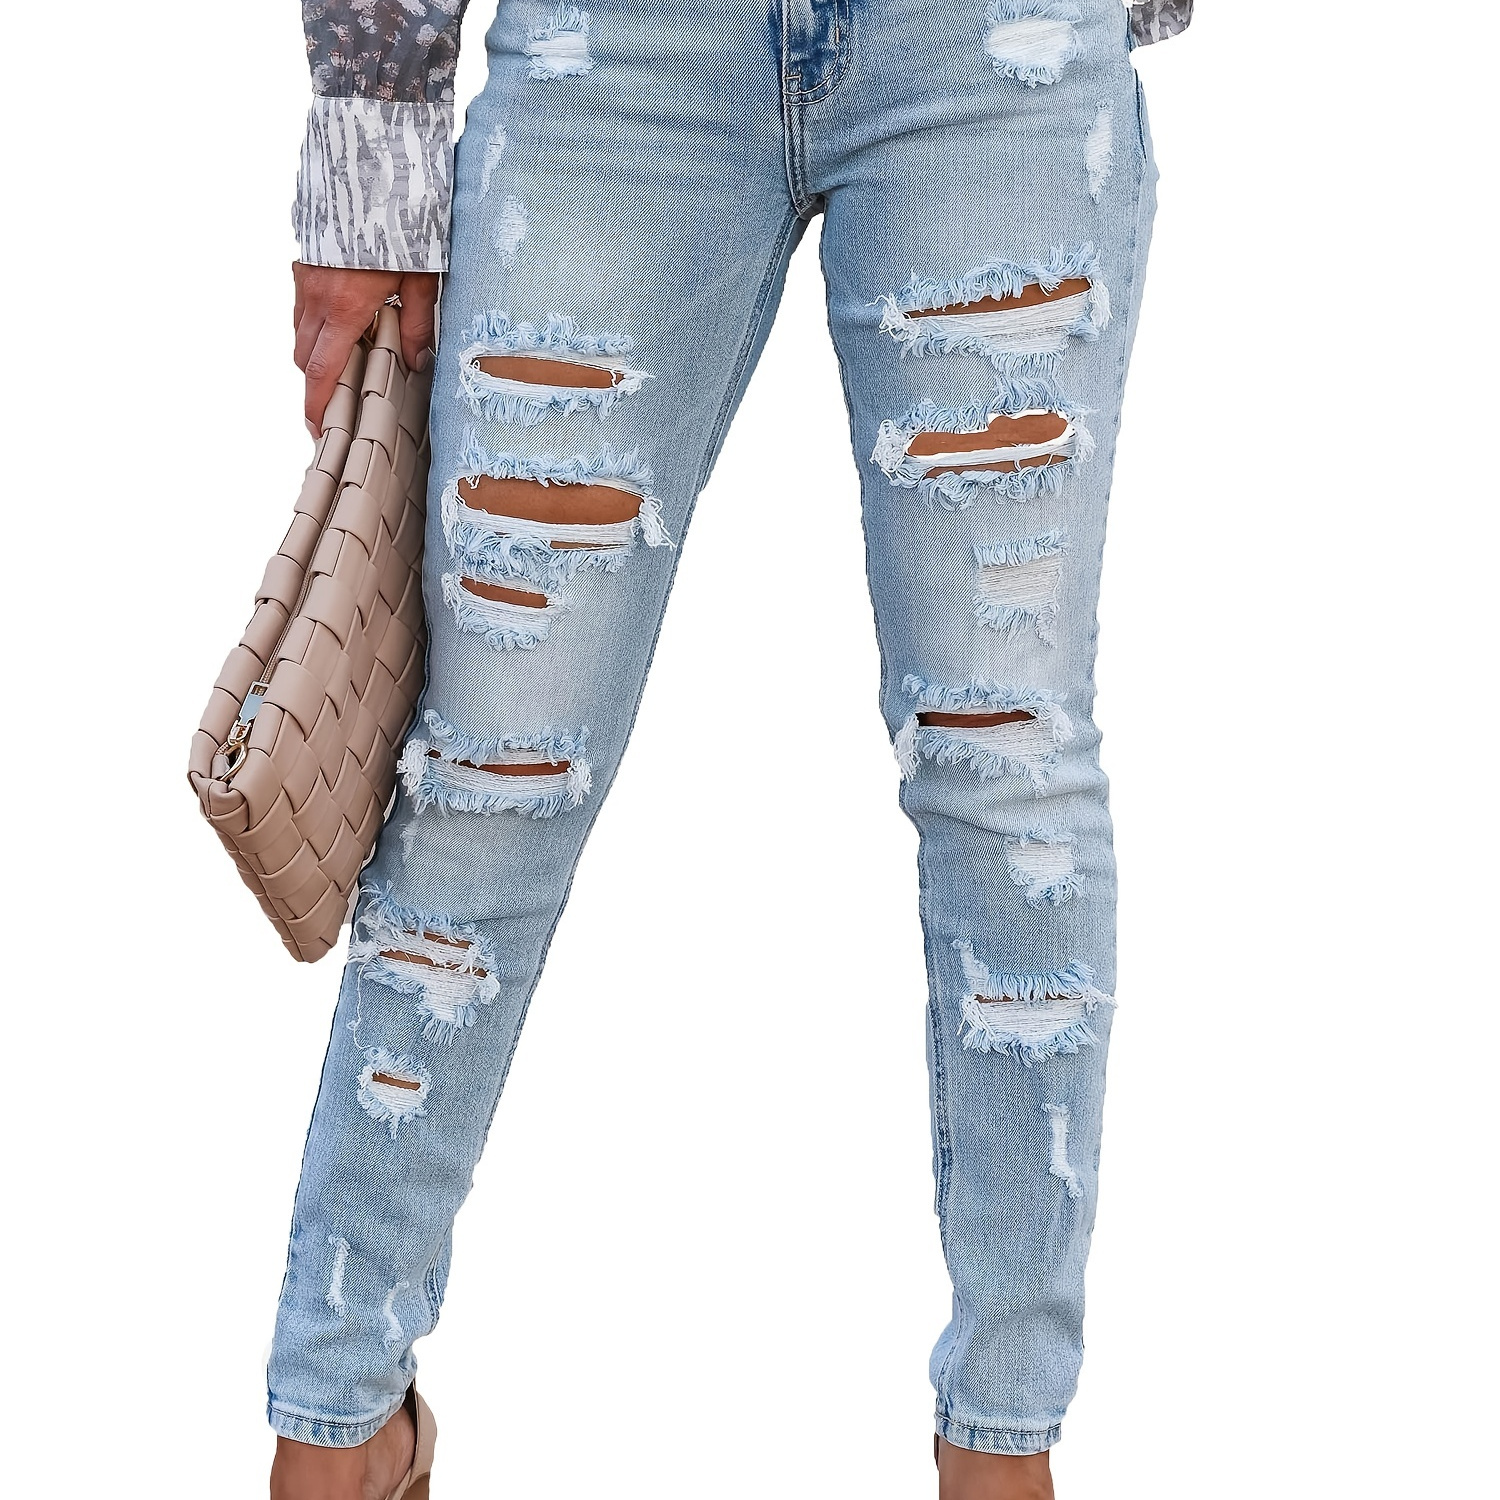 High Stretch Ripped Legs Skinny Jeans, Frayed Distressed Light Blue ...